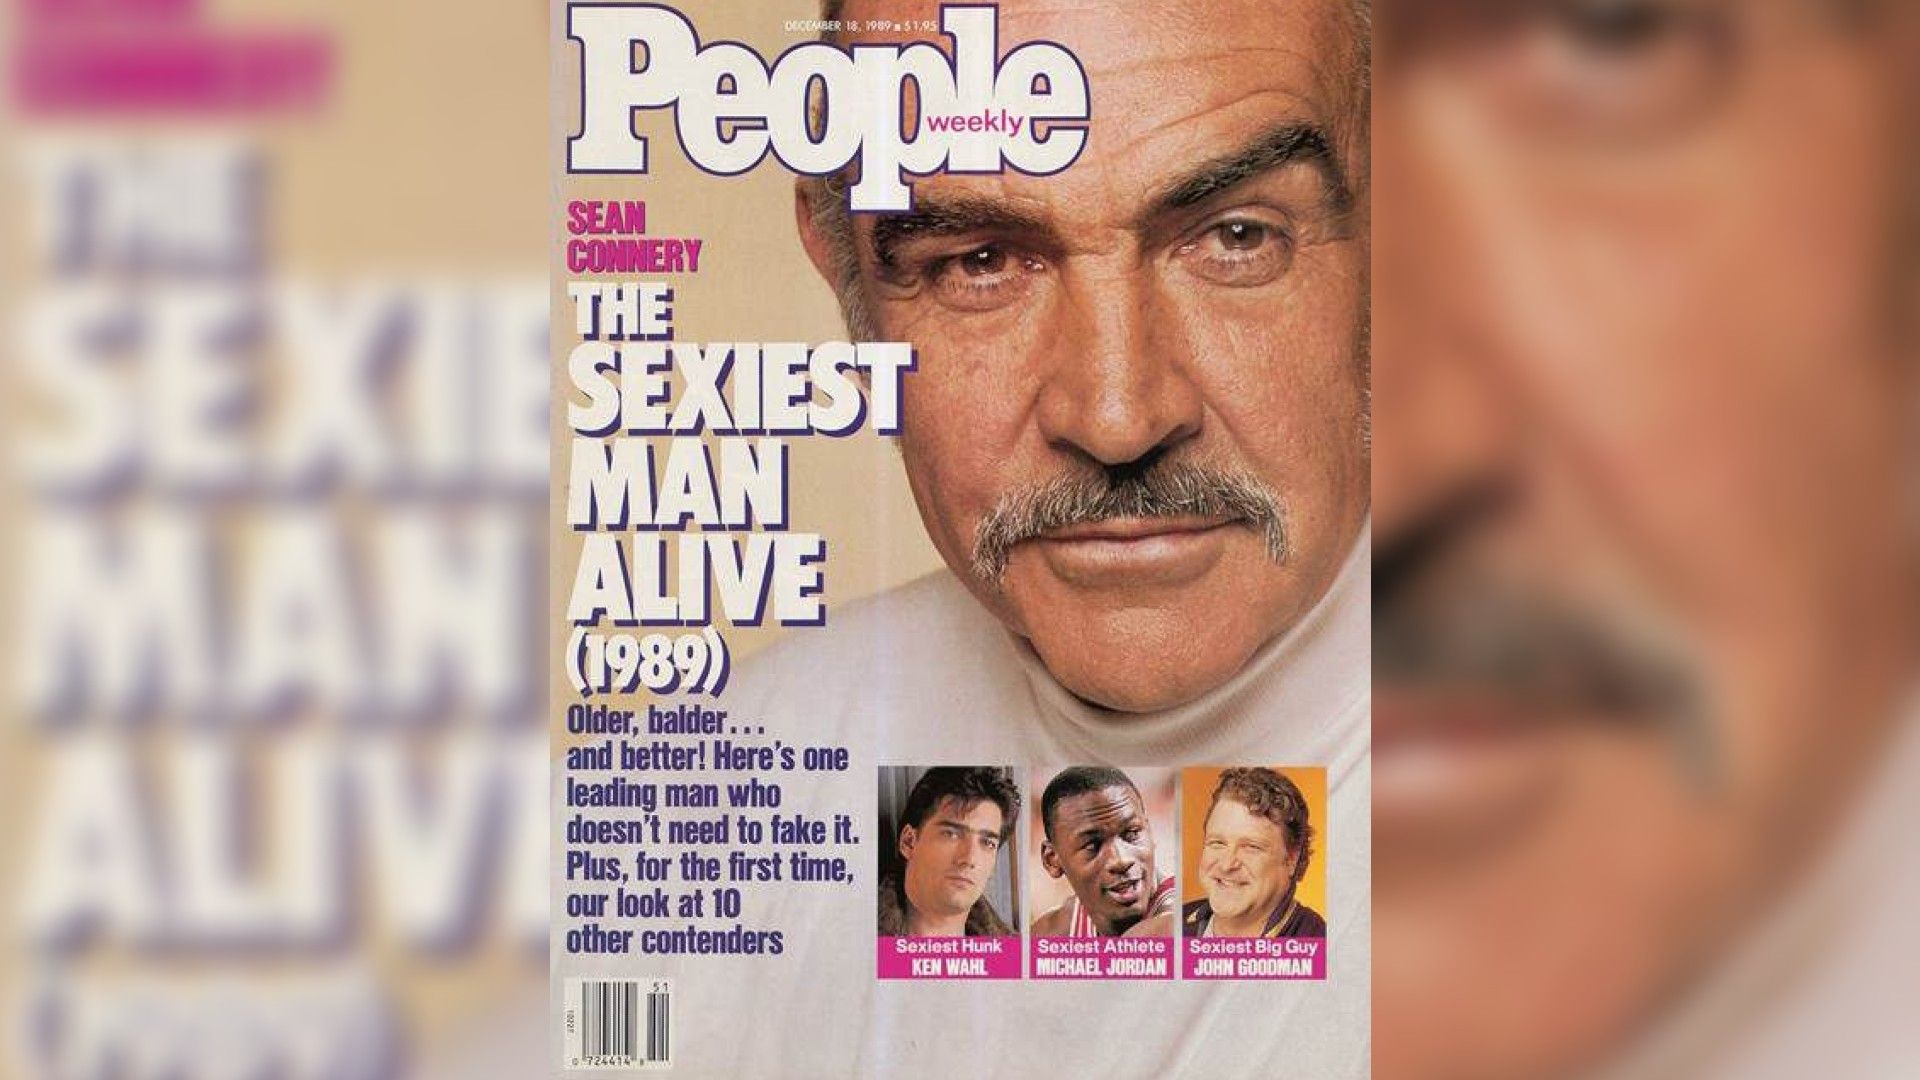 Sean Connery on «People» cover in 1989